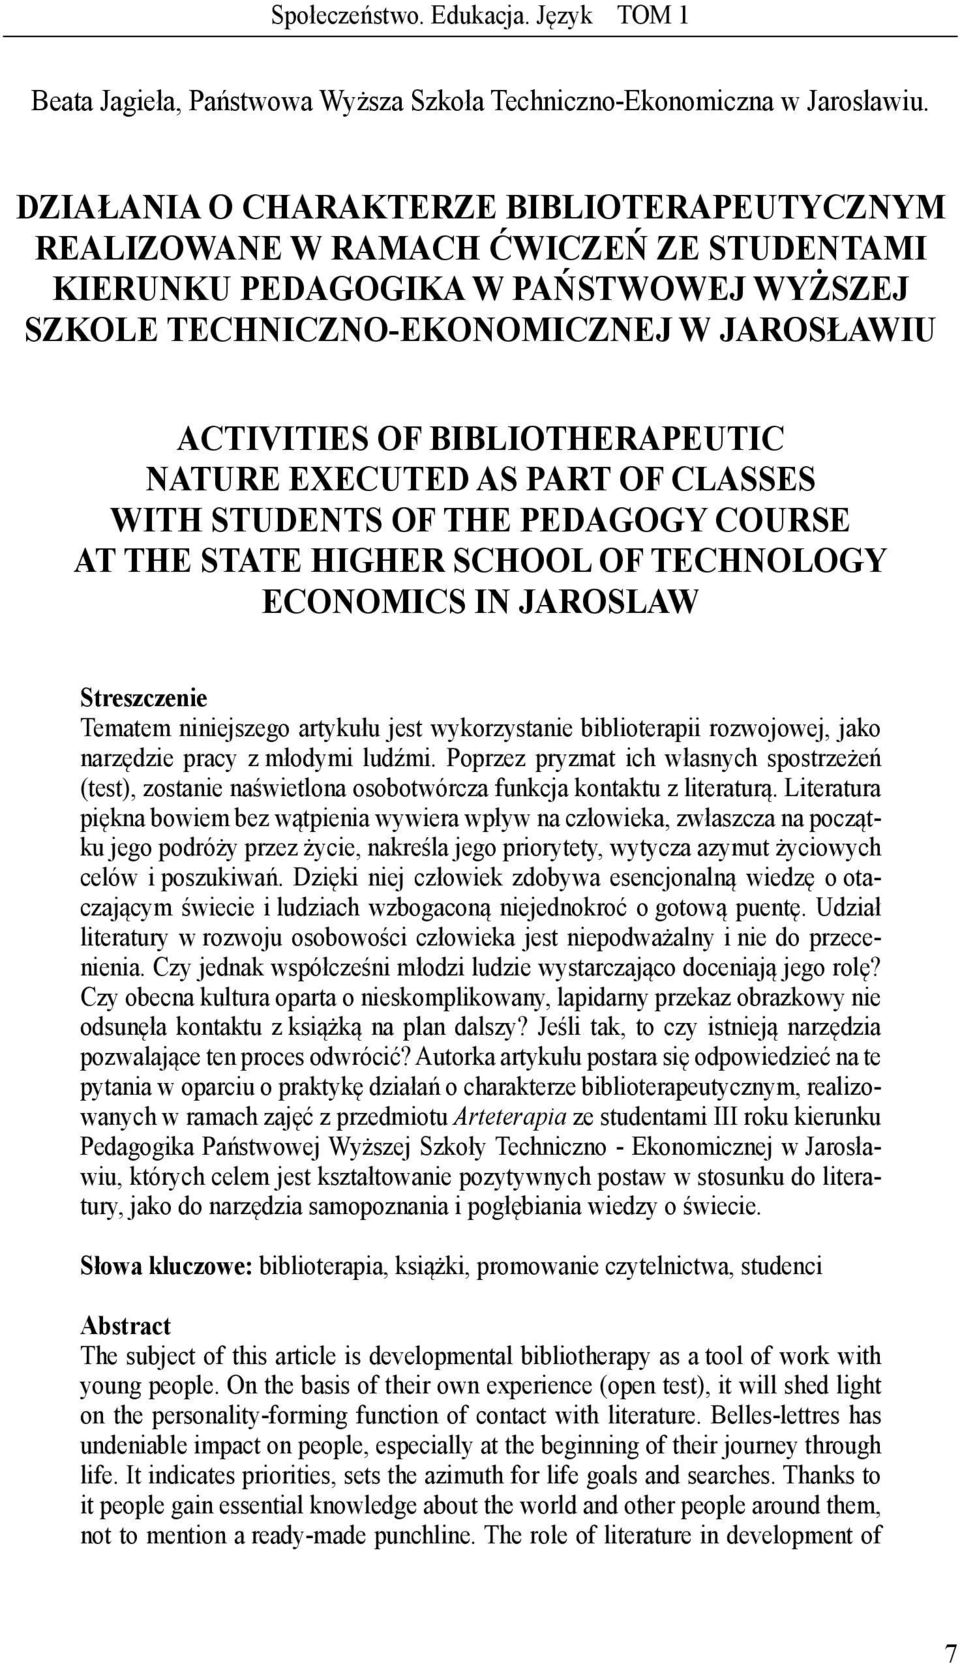 BIBLIOTHERAPEUTIC NATURE EXECUTED AS PART OF CLASSES WITH STUDENTS OF THE PEDAGOGY COURSE AT THE STATE HIGHER SCHOOL OF TECHNOLOGY ECONOMICS IN JAROSLAW Streszczenie Tematem niniejszego artykułu jest